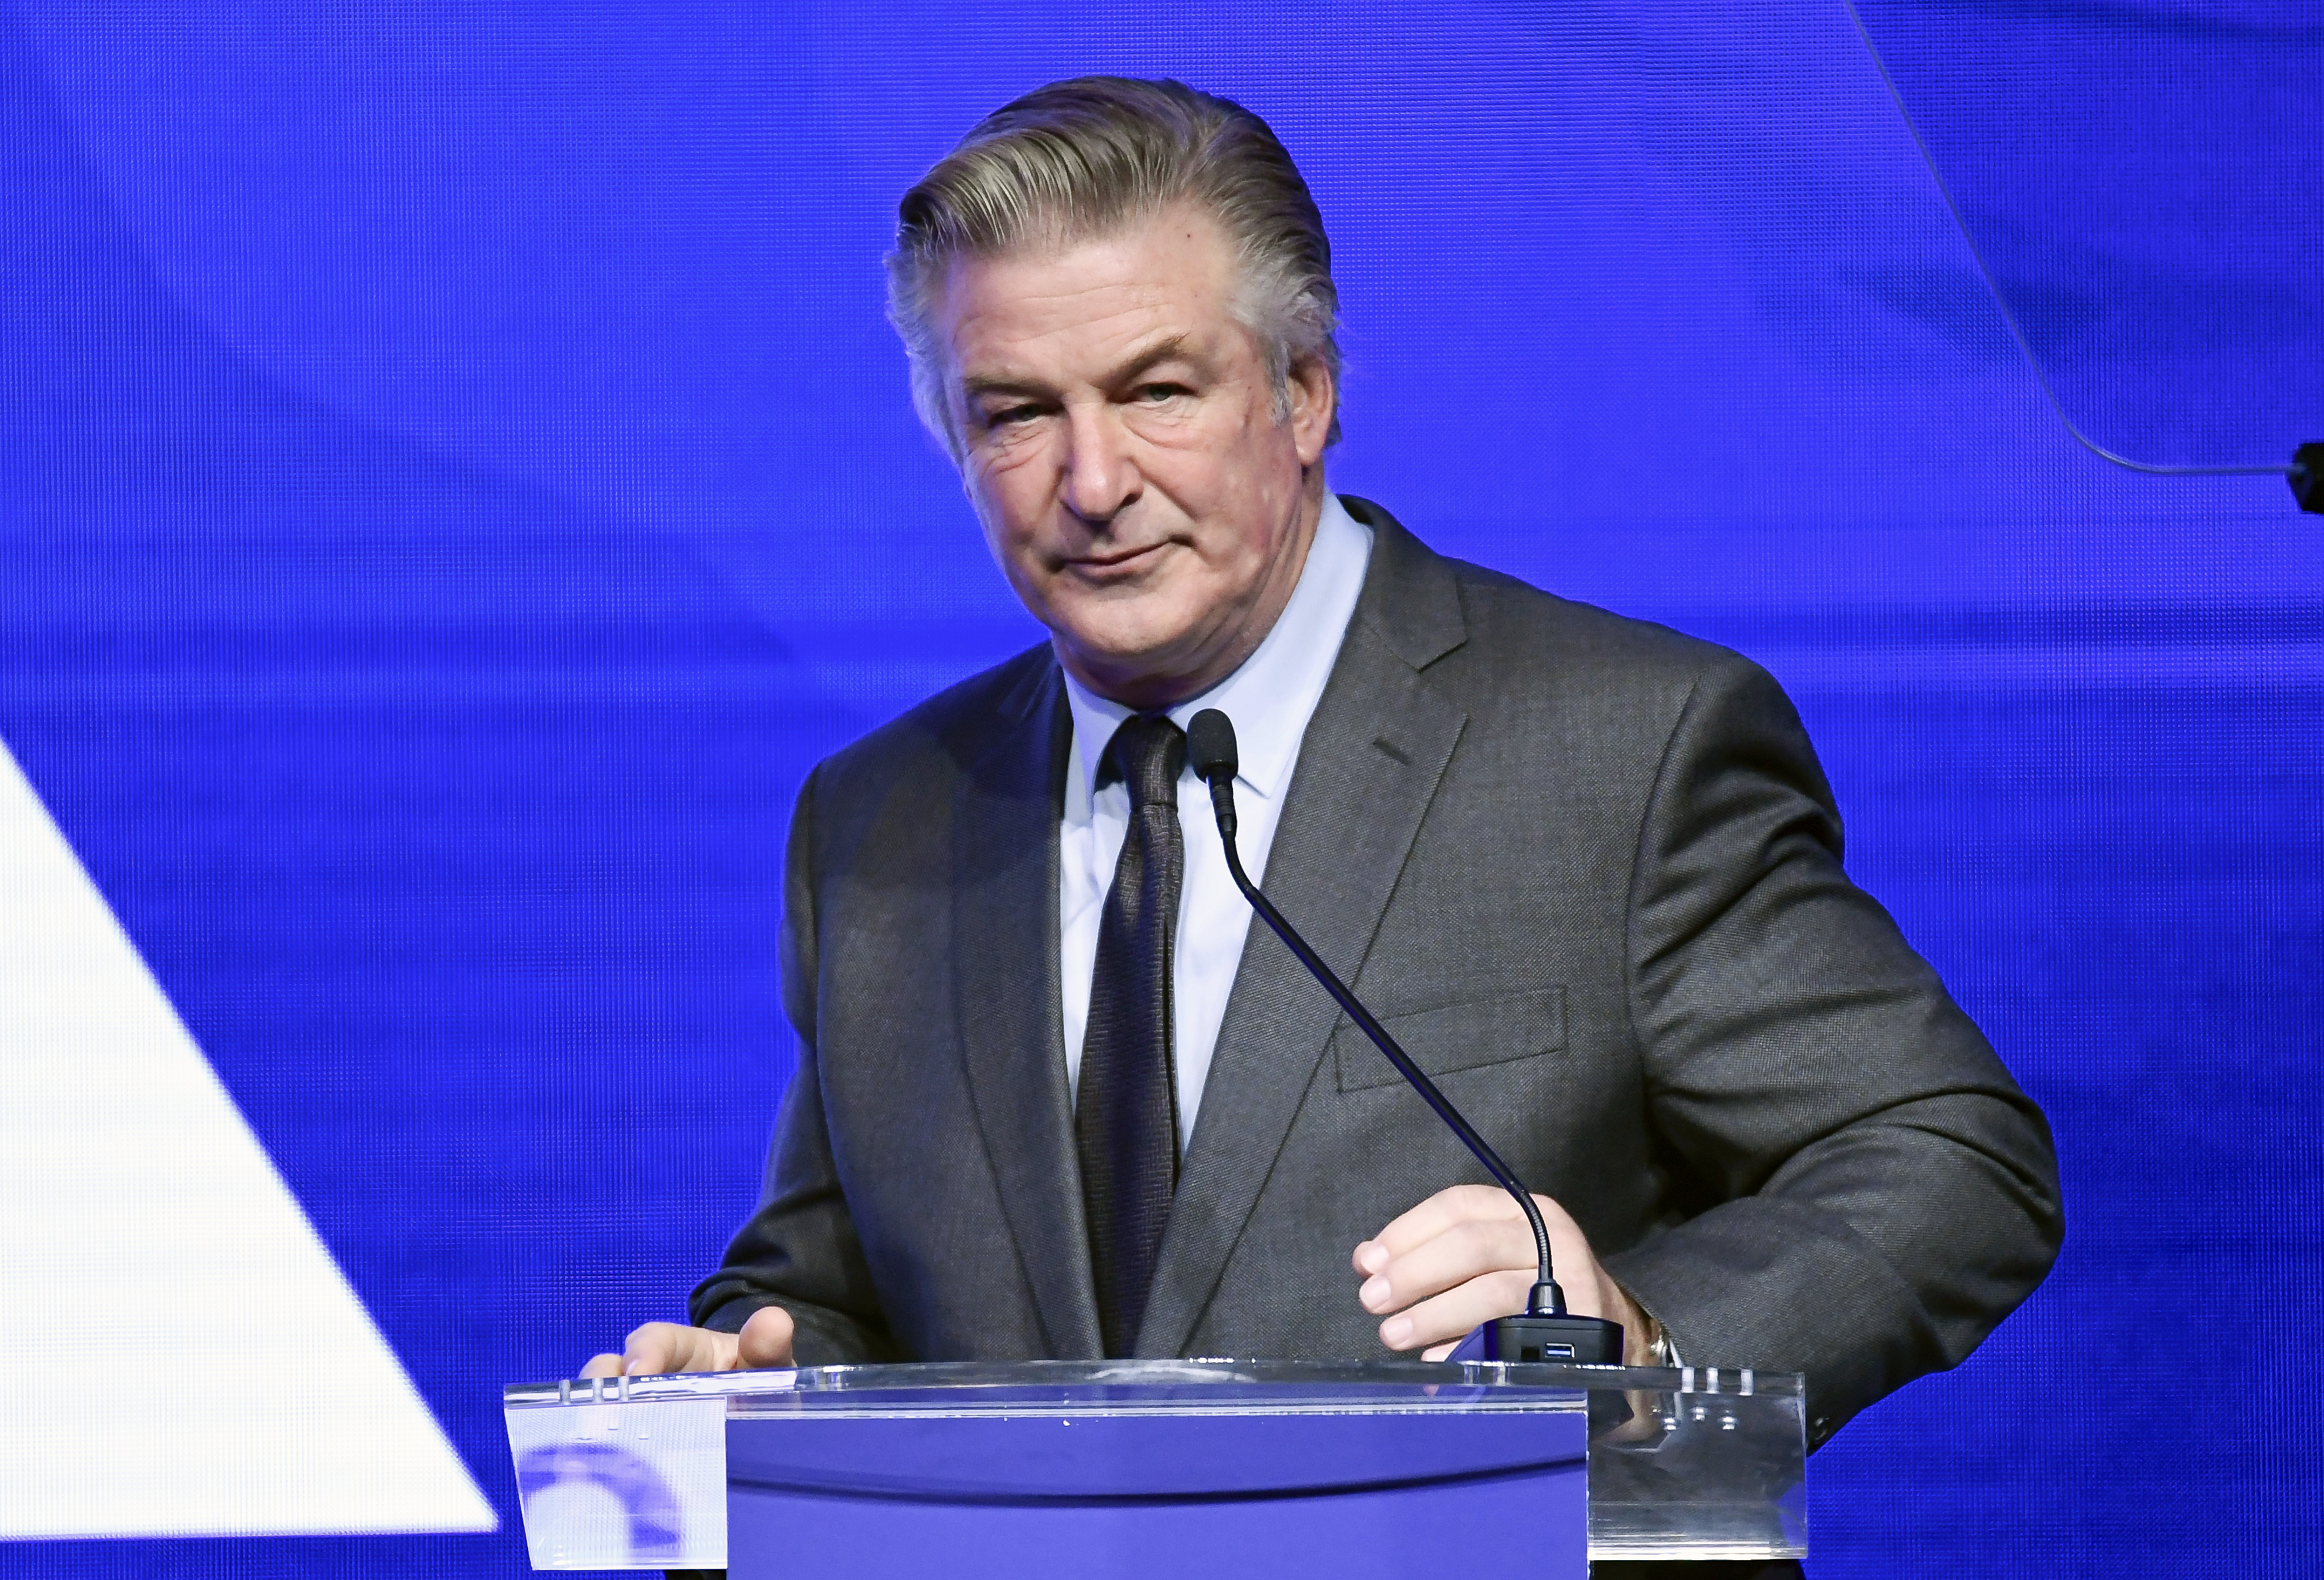 Alec Baldwin performs emcee duties at the Robert F. Kennedy Human Rights Ripple of Hope Award Gala at New York Hilton Midtown on Dec. 9, 2021, in New York.&nbsp;